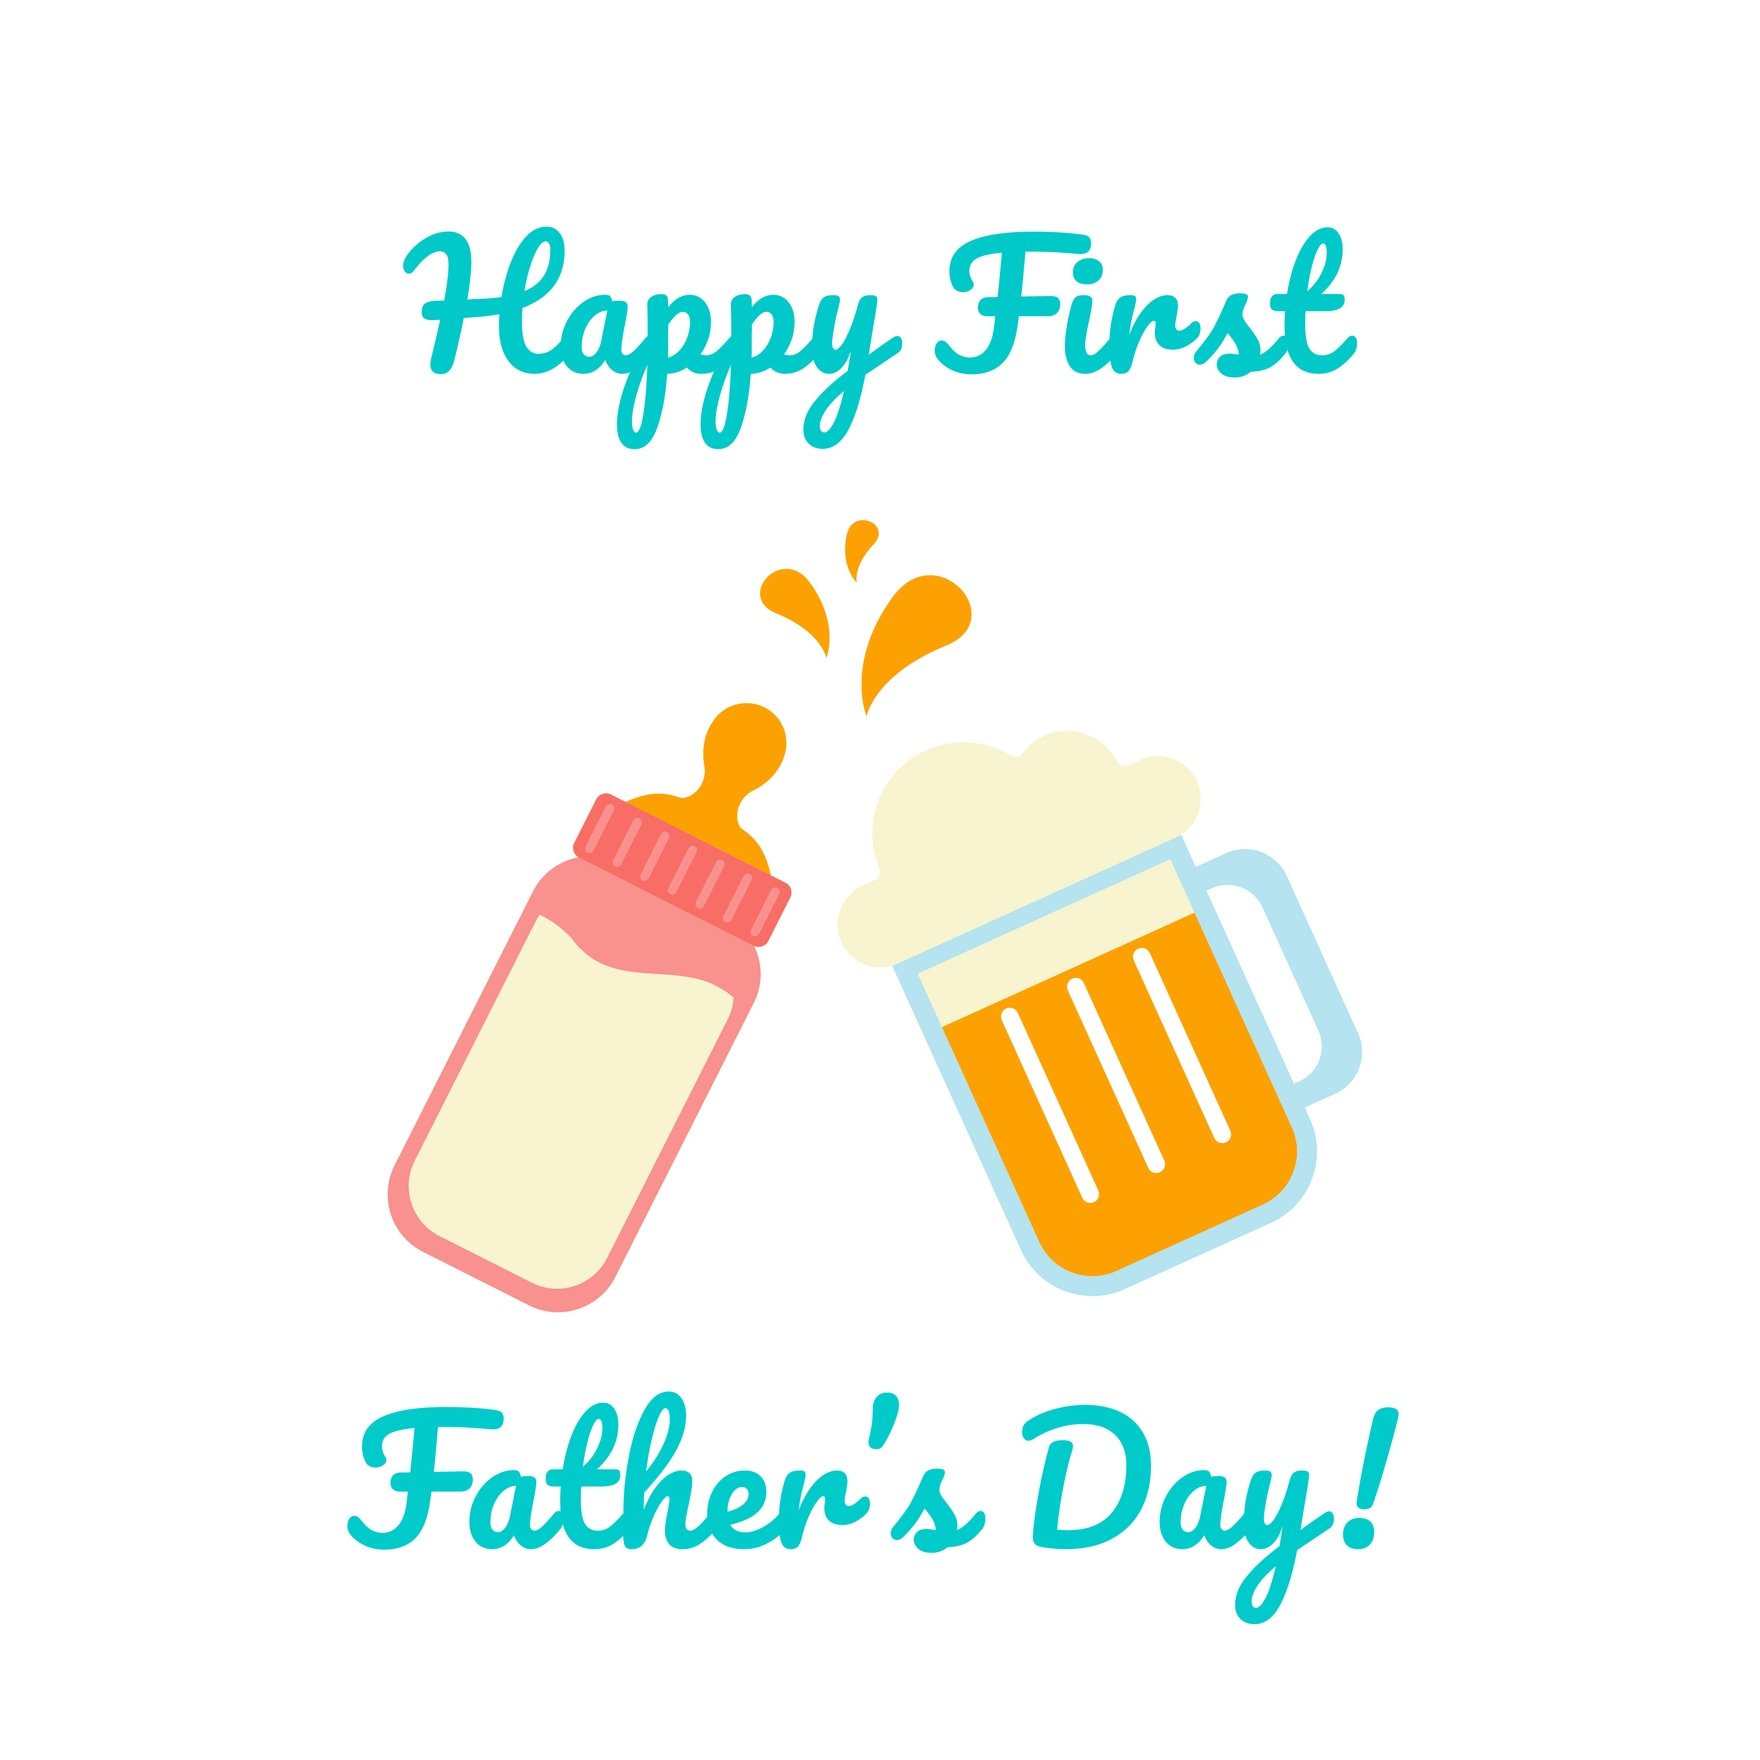 Free Black Happy Father's Day Gif in Illustrator, EPS, SVG, JPG, GIF, PNG, After Effects